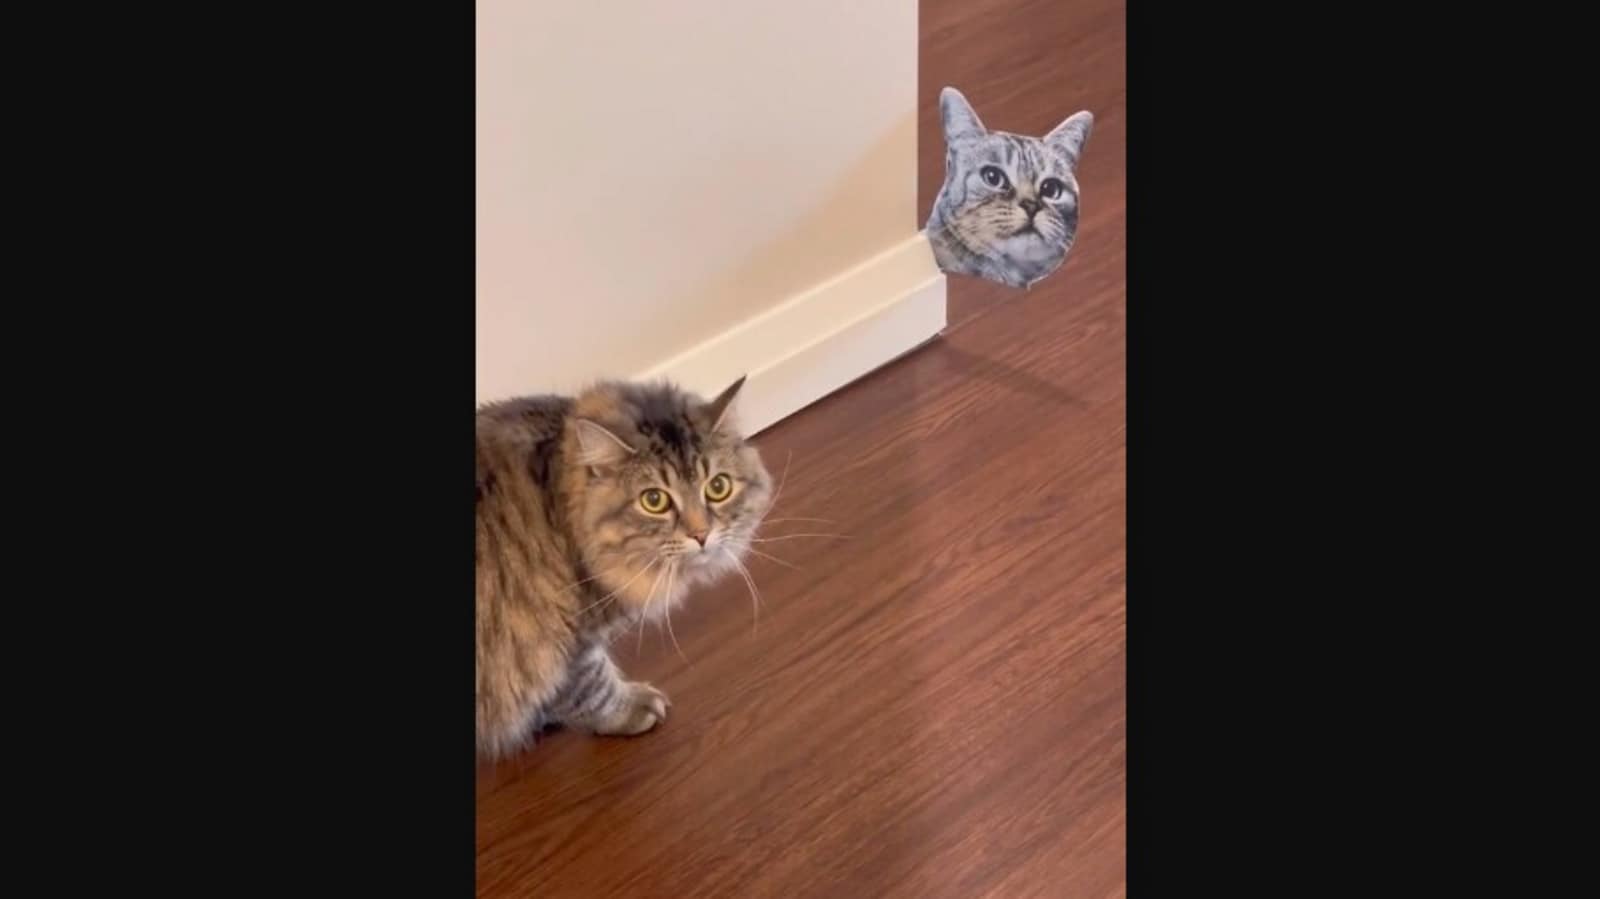 Human gets cat’s cutout to prank pet kitties. Watch how they react